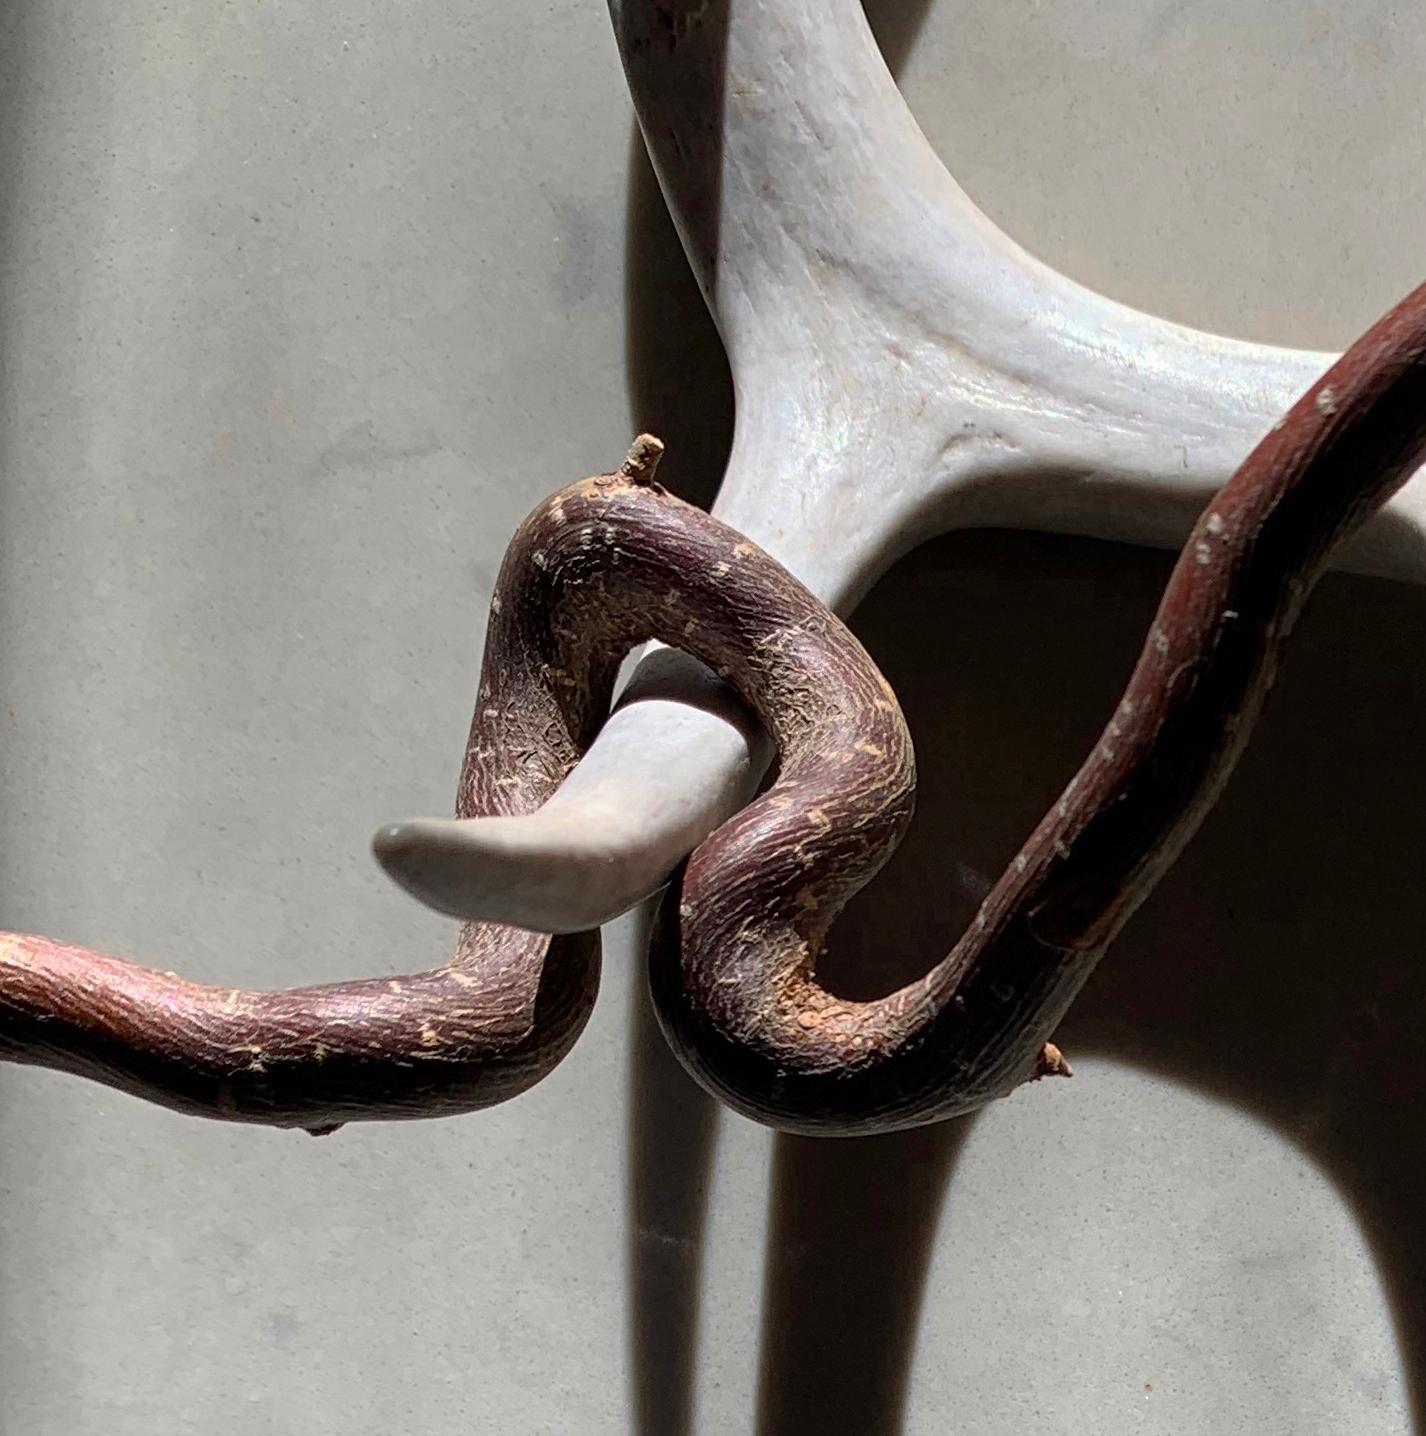 Untitled (2159): still life photograph w/ antler & abstract shadow patterns, lg - Photograph by Paul Cava